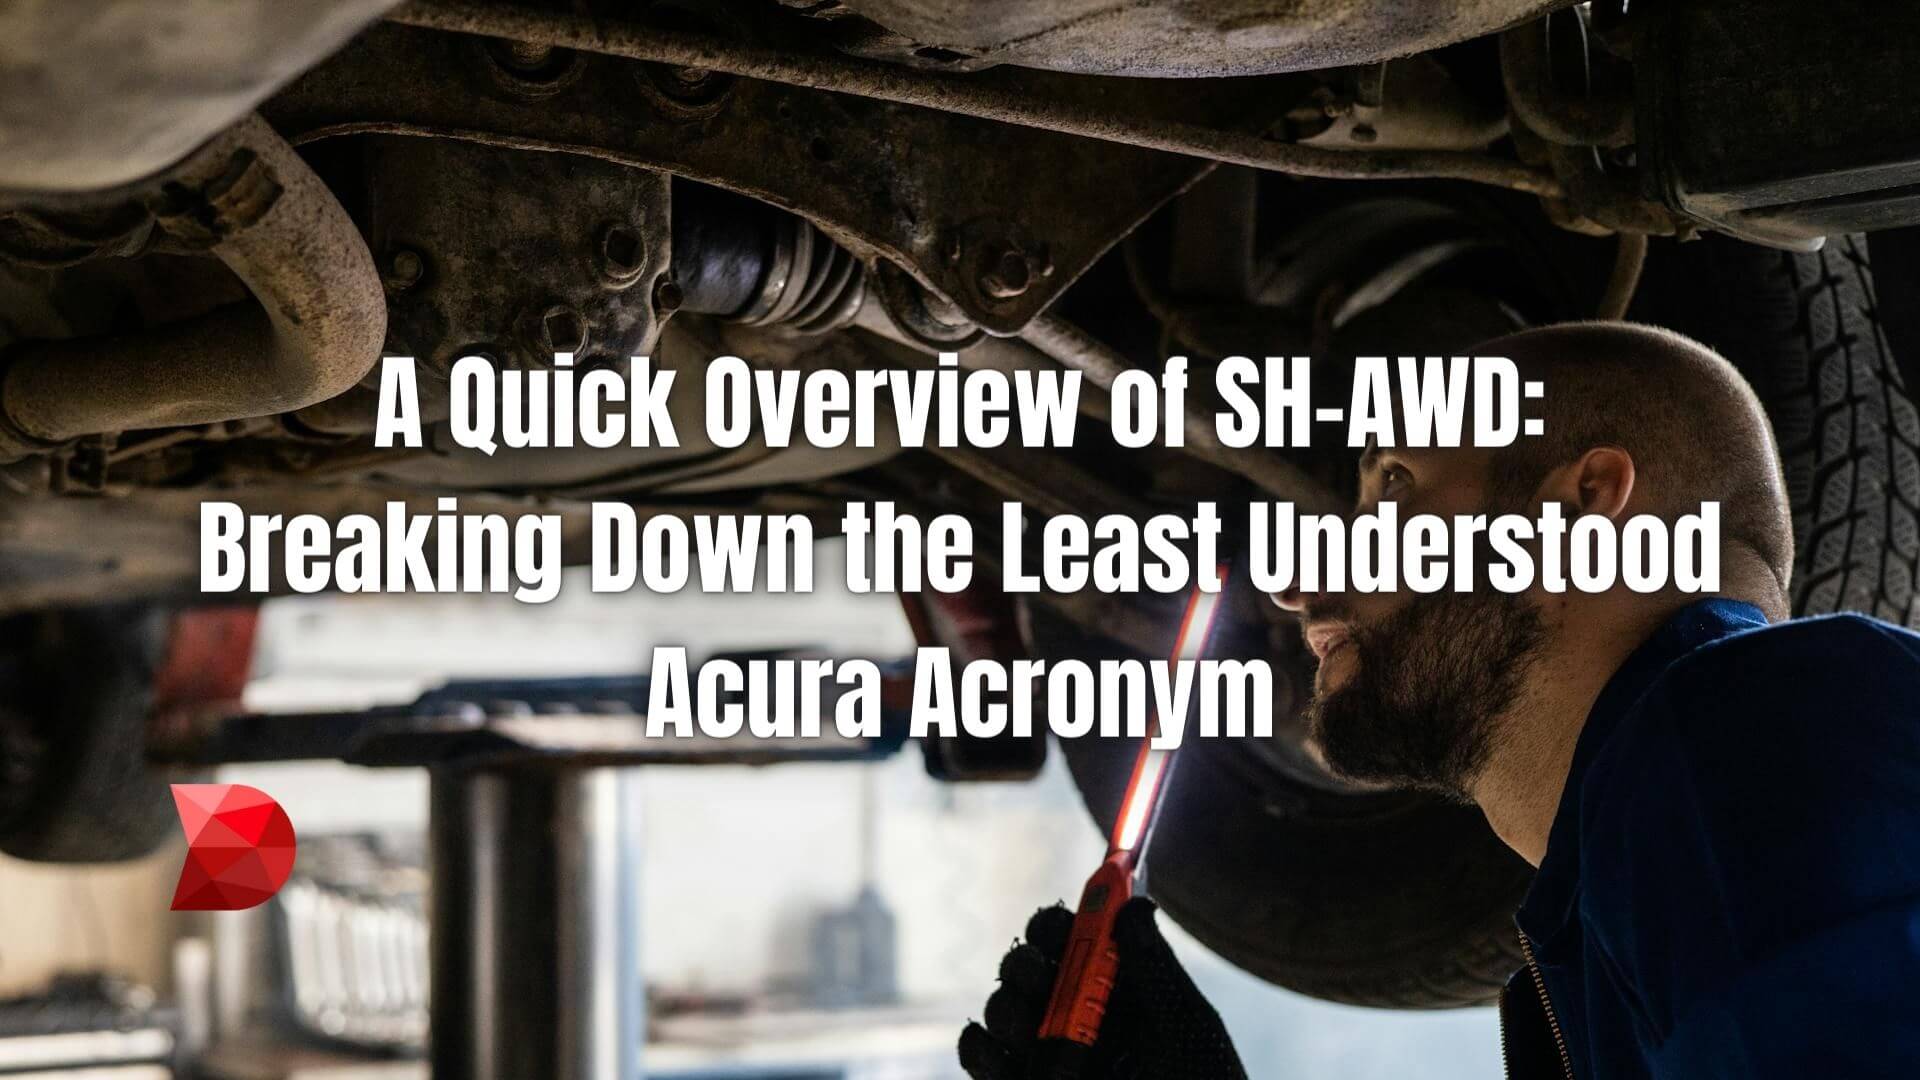 Decode SH-AWD with our quick overview! Click here to explore the least understood Acura acronym and gain valuable insights.